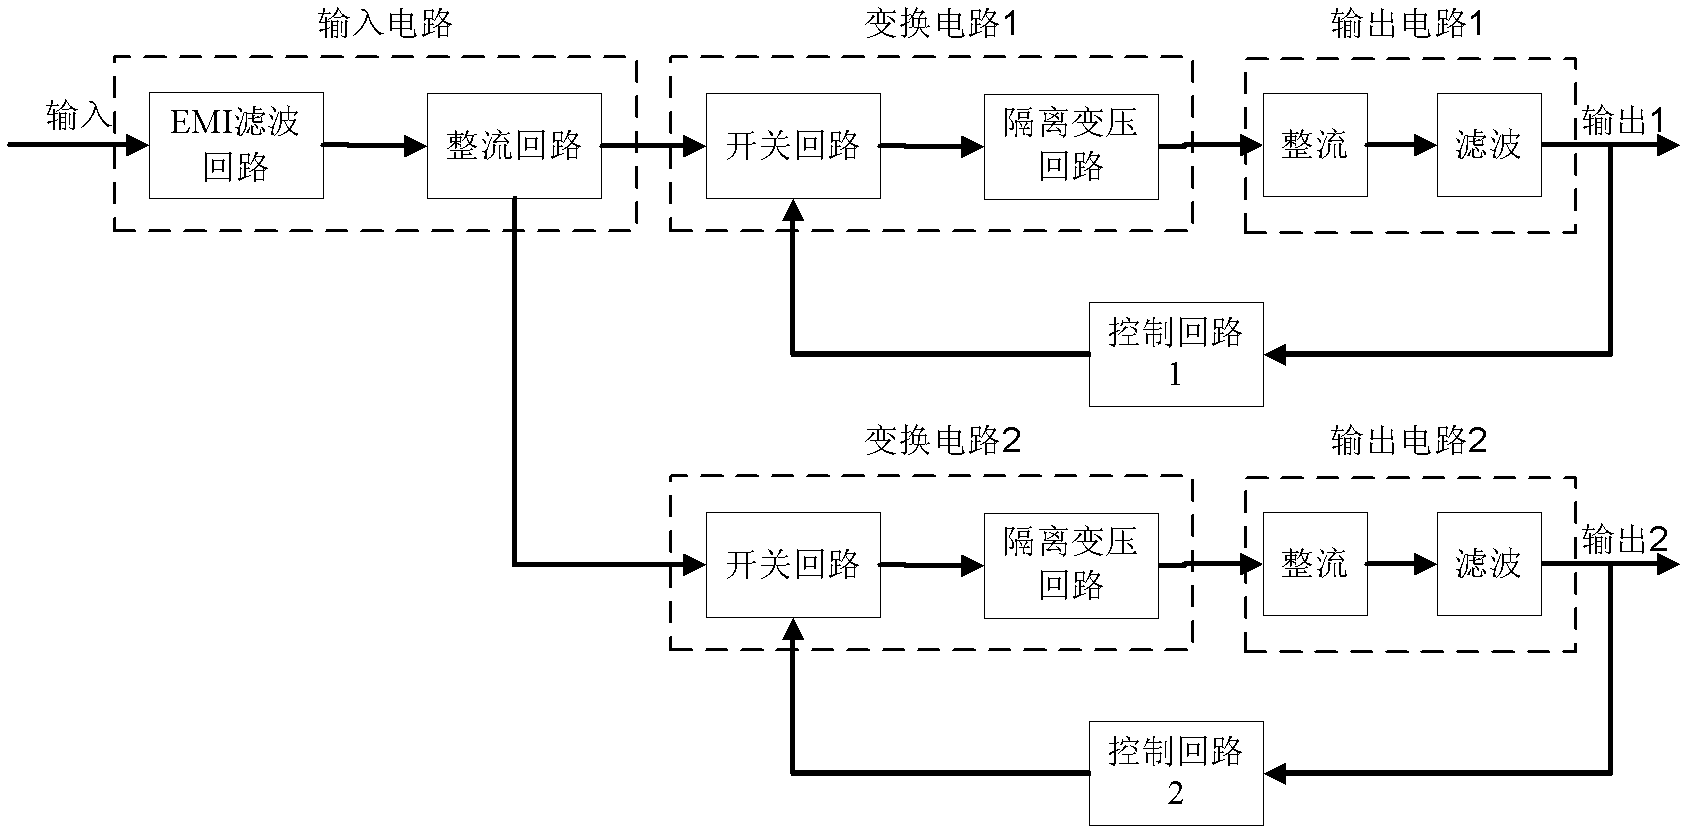 Distributed power supply system of relay protection device